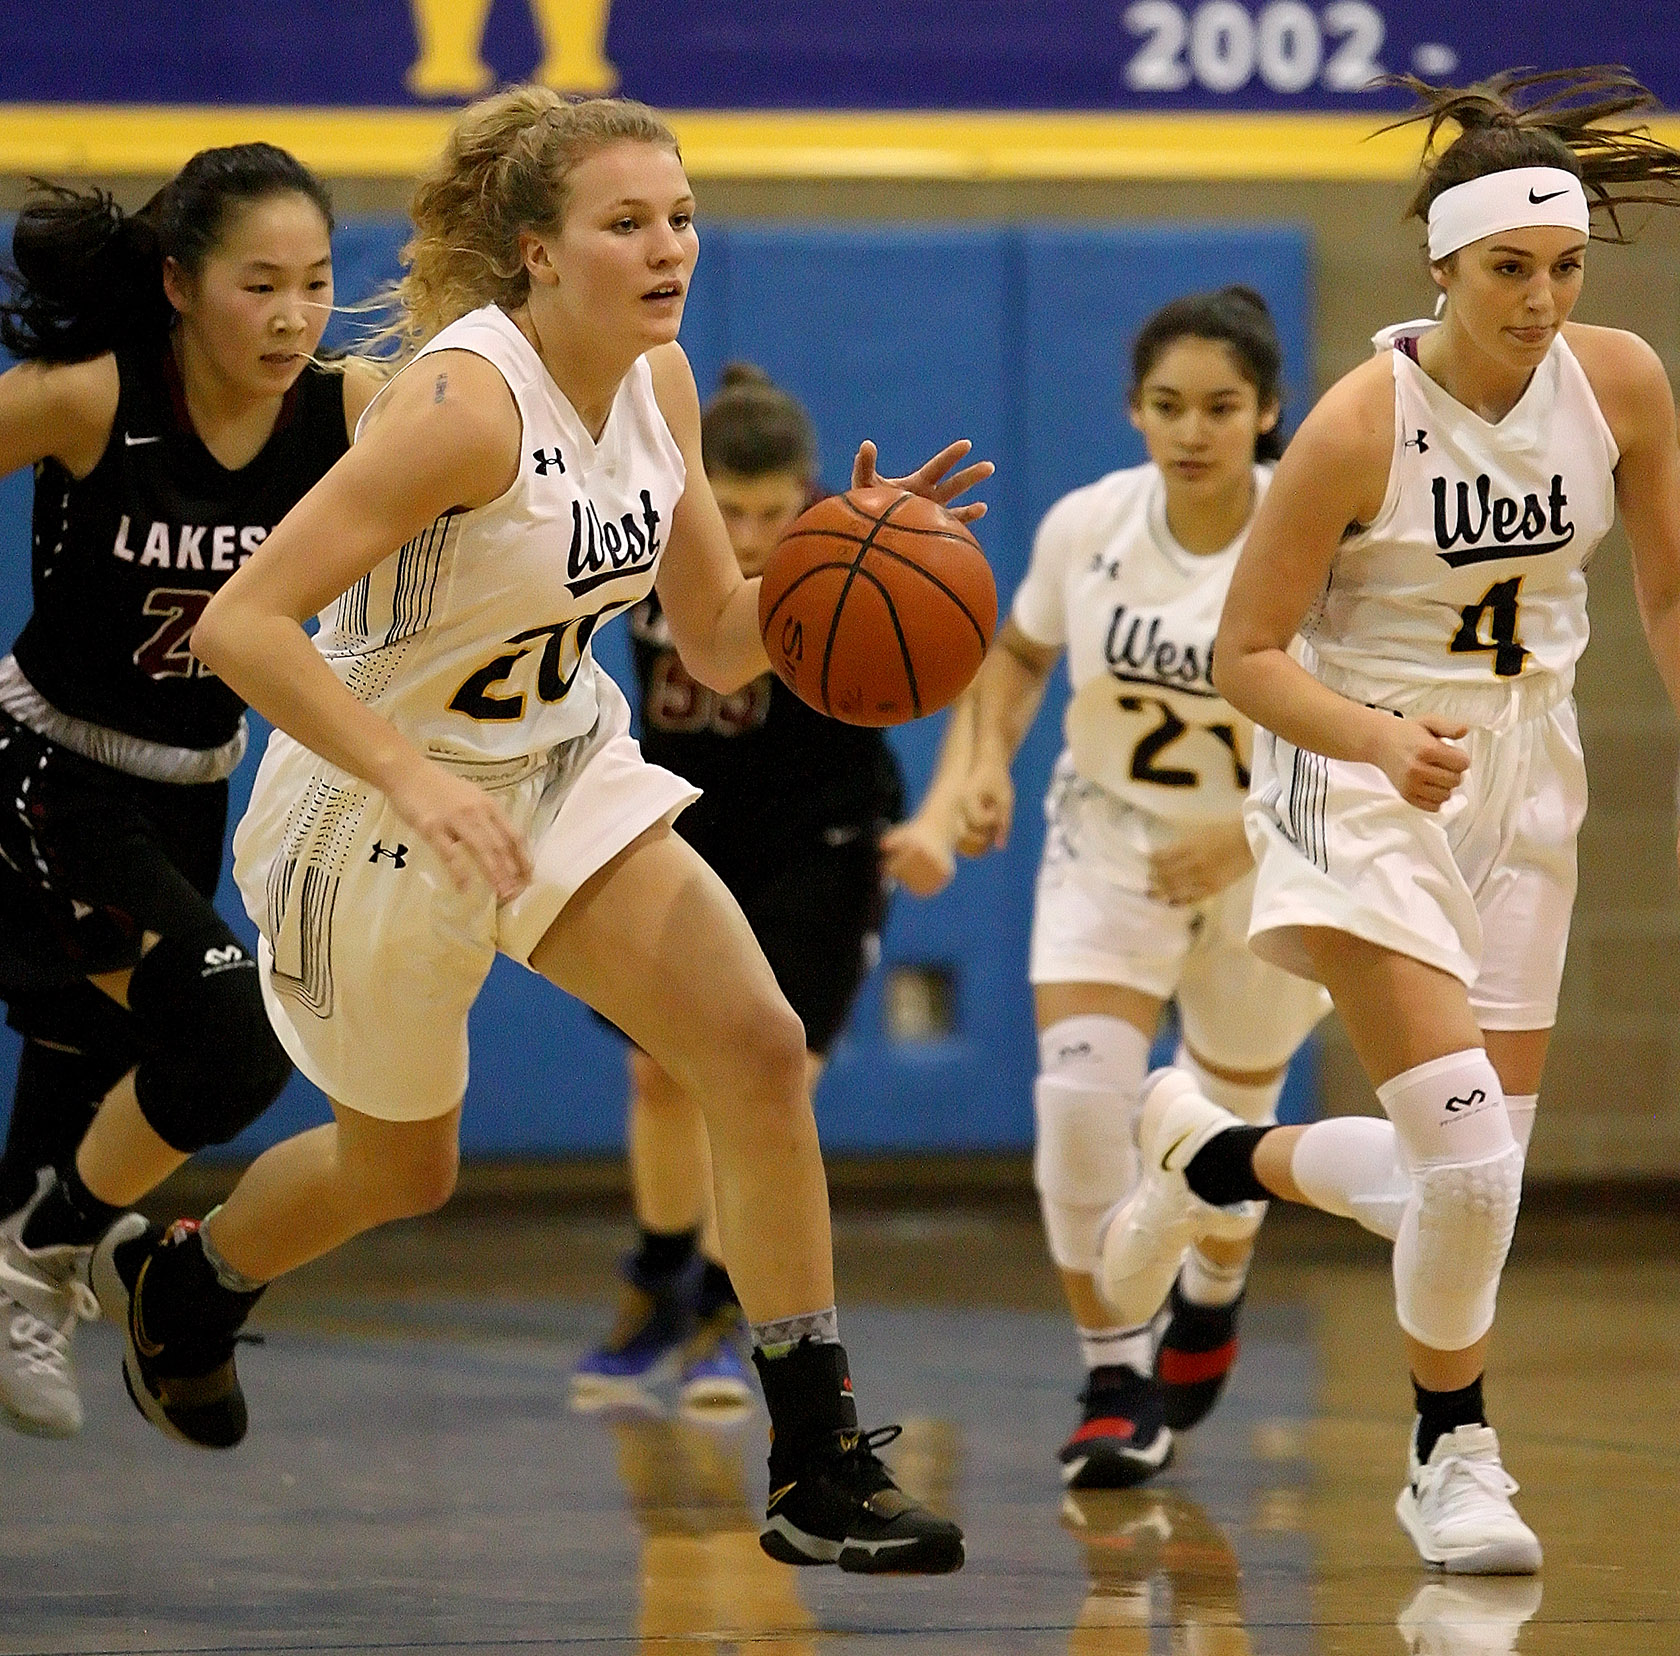 Grace Sarver of West Seattle dribbles the ball up on a fast break.